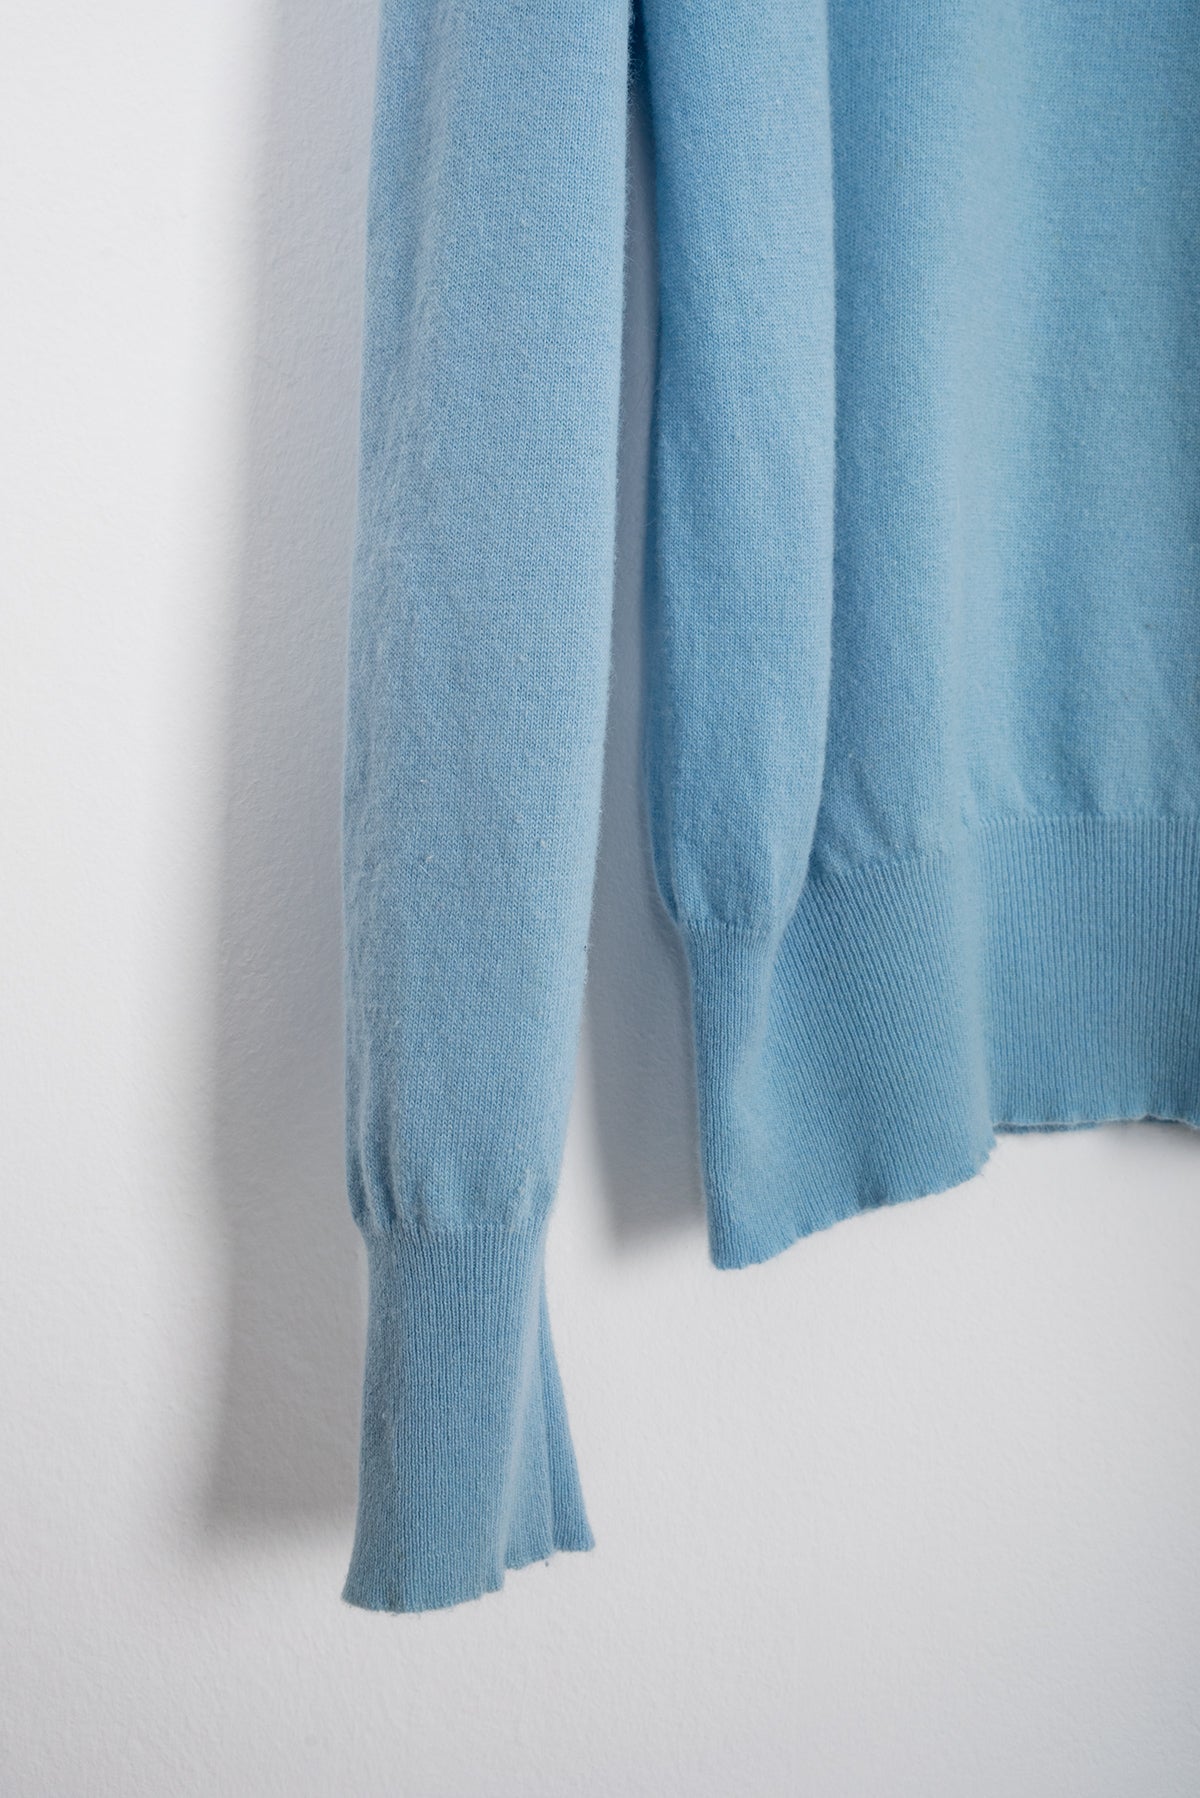 2002 A/W WIDE RIBBING V-NECK SWEATER IN IRIDESCENT LIGHT BLUE BY MISS DEANNA